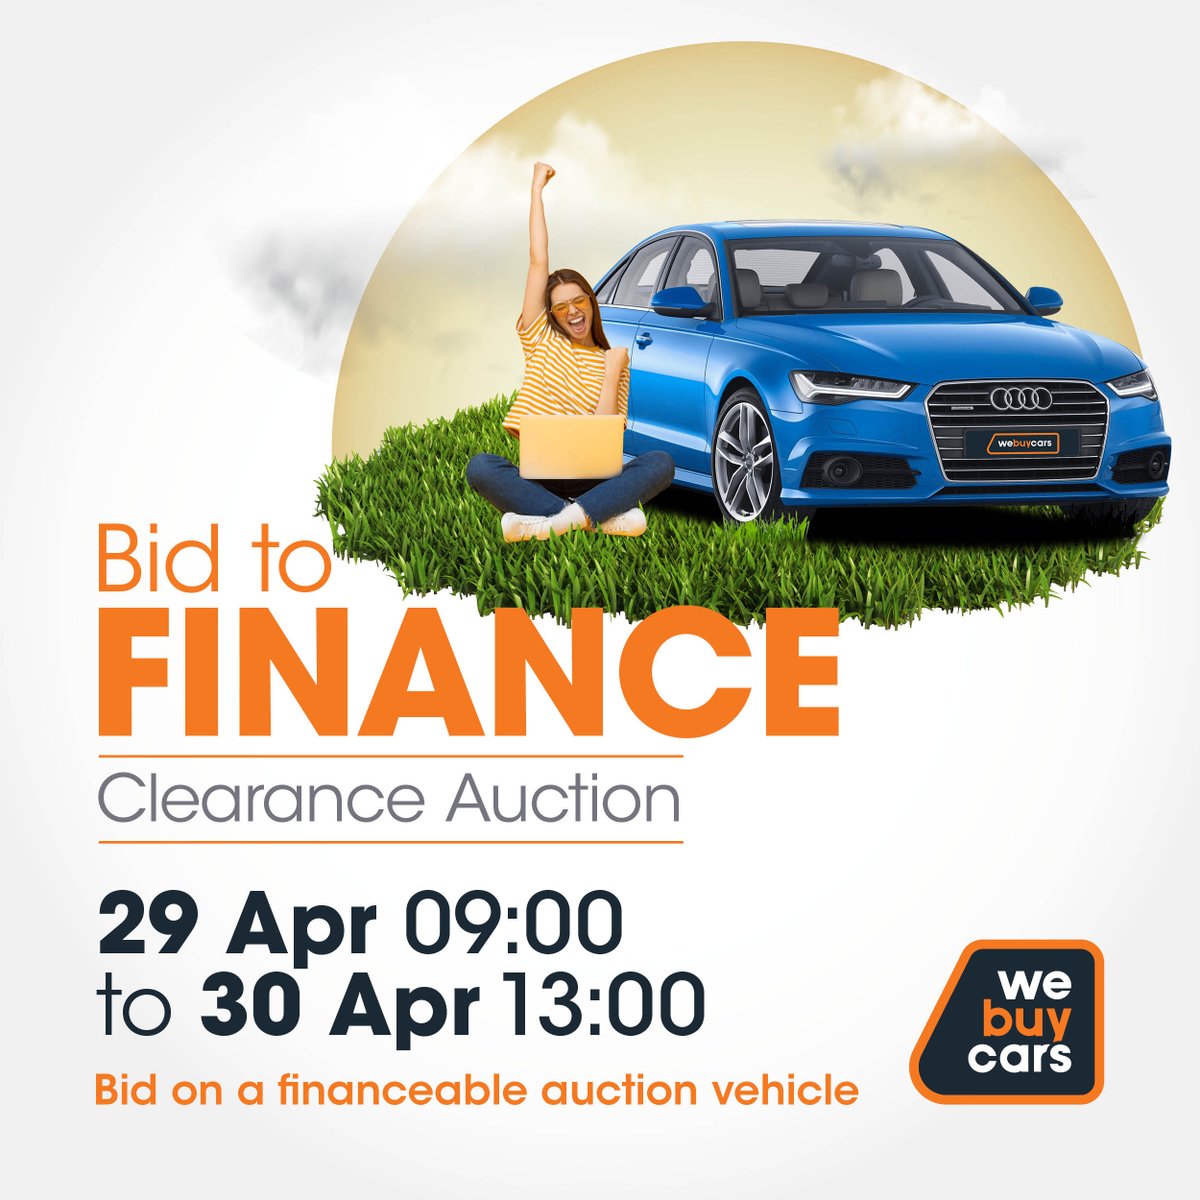 Start your engines 🚗💨 #WeBuyCars is offering financeable auction vehicles. Your next vehicle might just be one bid away! 

#carsforsale #preownedcars #usedcars #usedcarsforsale #carshopping #carfinance #autosales #carsales #carlifestyle #budgetfriendly